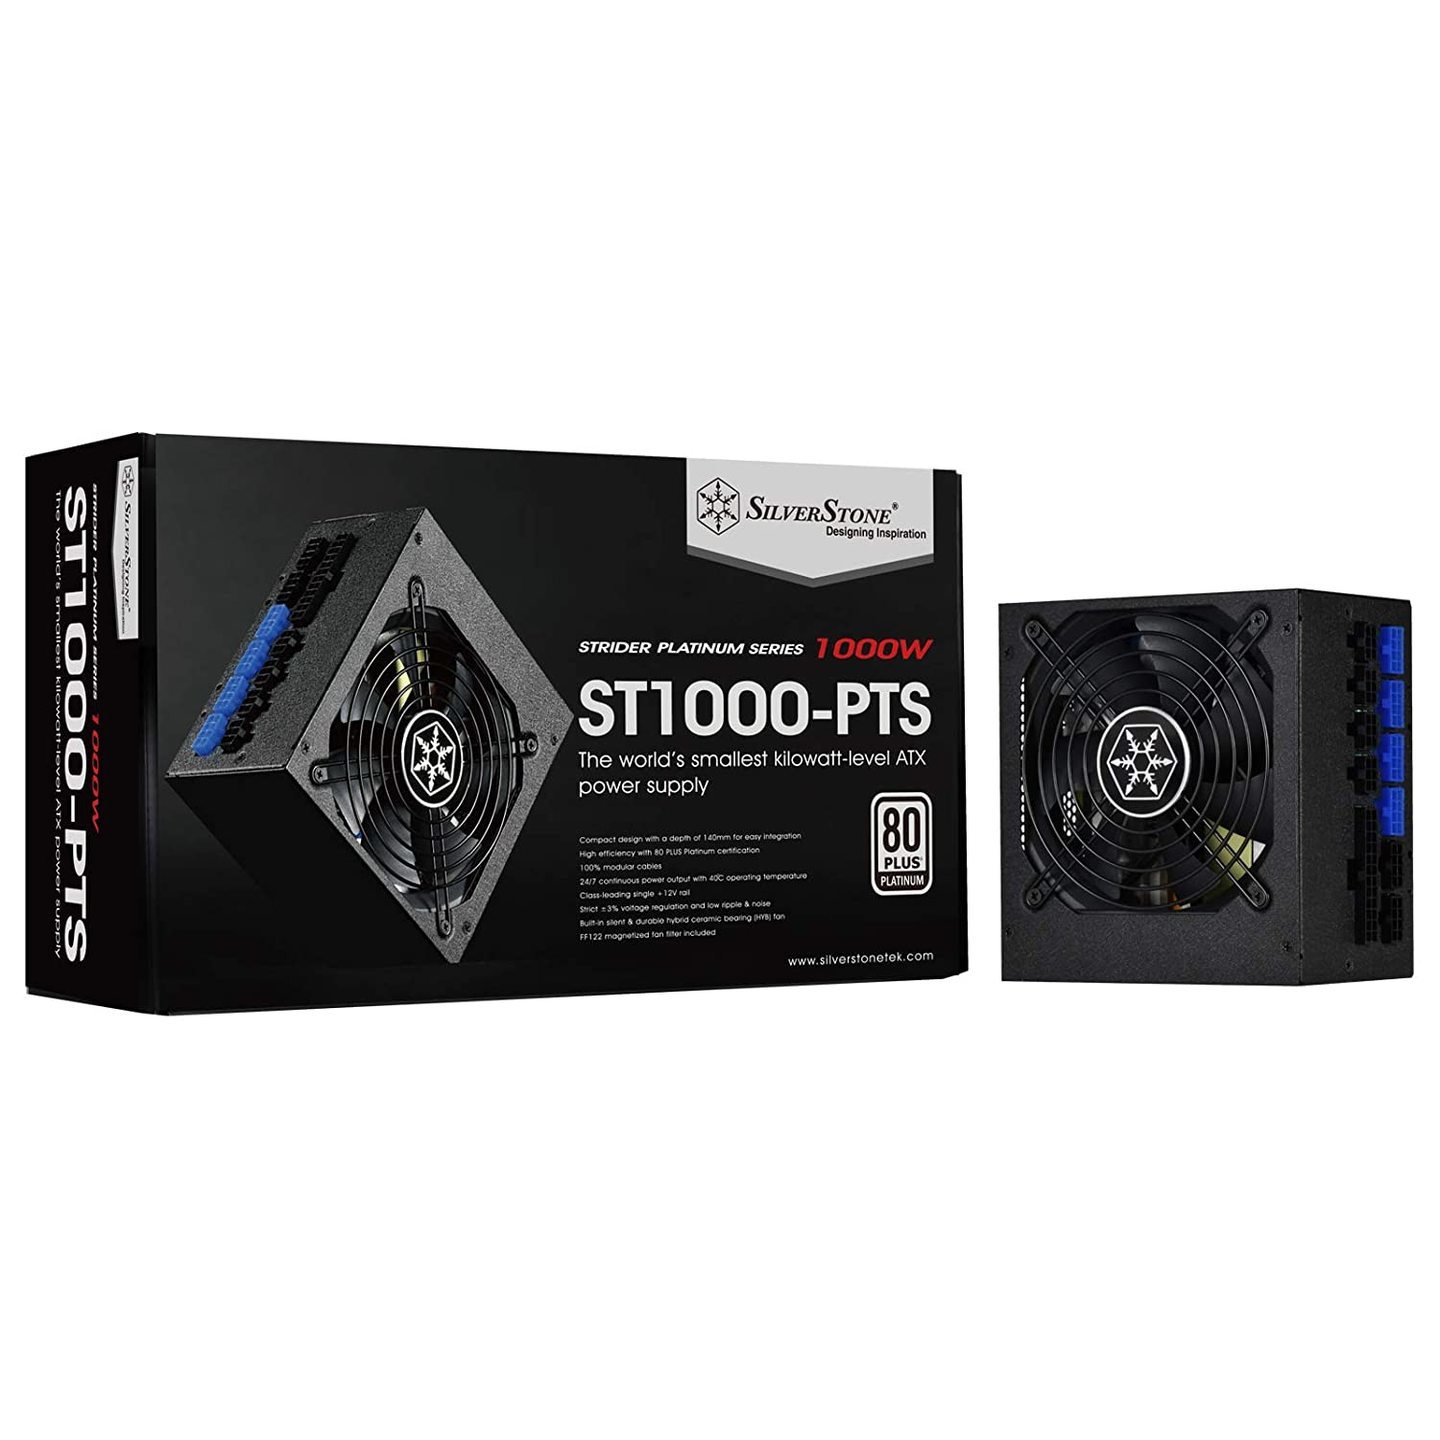 Silverstone ST1000-PTS 1000 Watt 80 Plus Platinum Fully Modular Power Supply in Compact Design with a Depth of 140mm